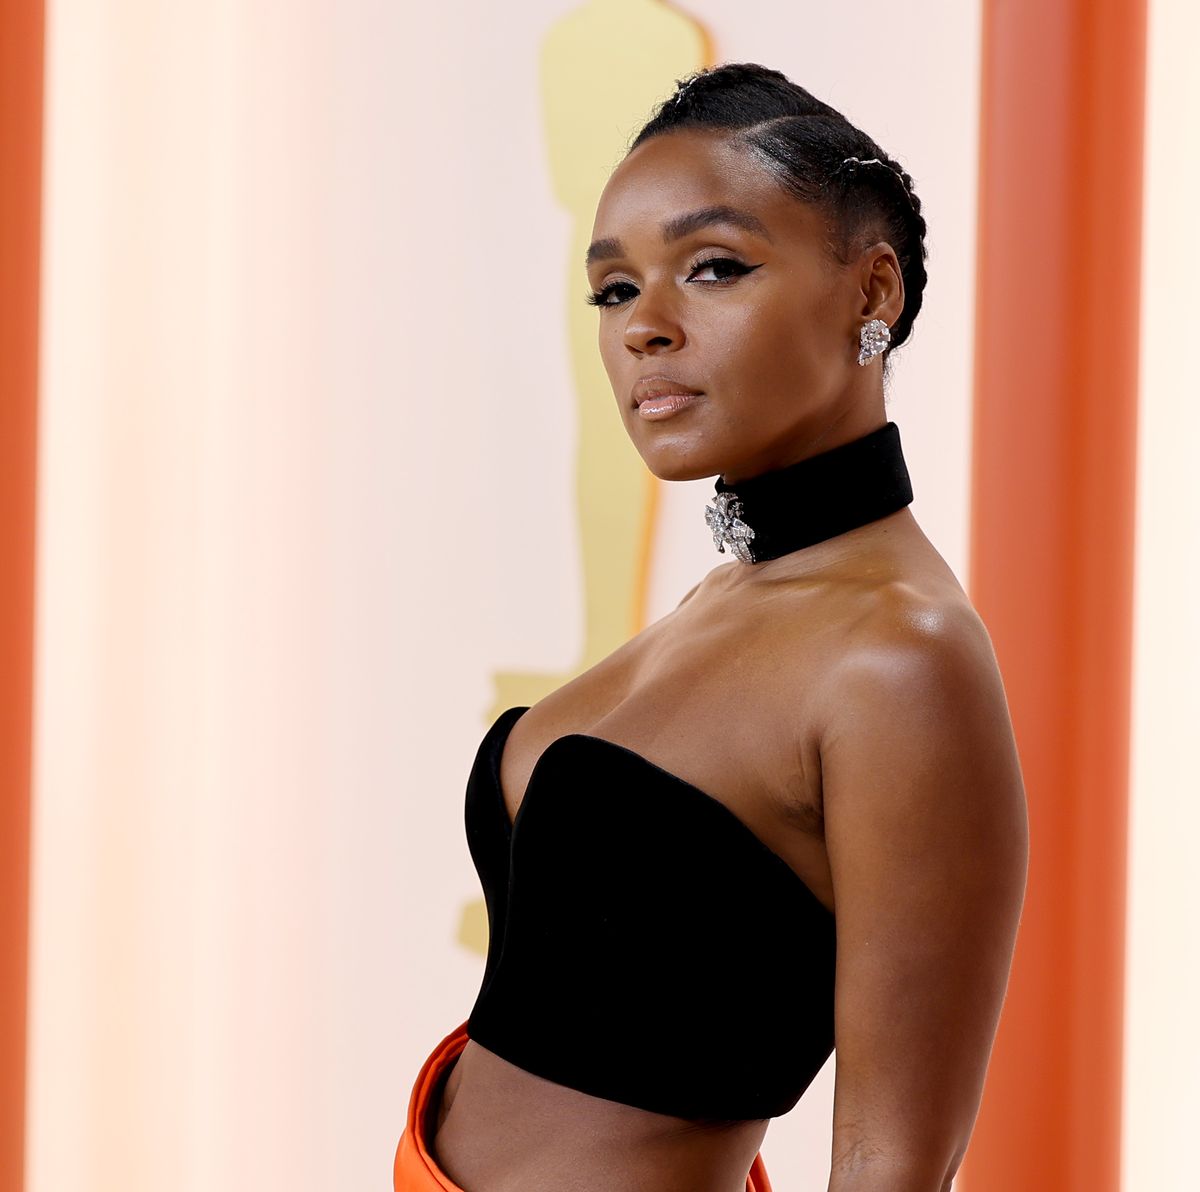 Janelle Monae Explains Why She's 'Happier' Not Wearing a Bra